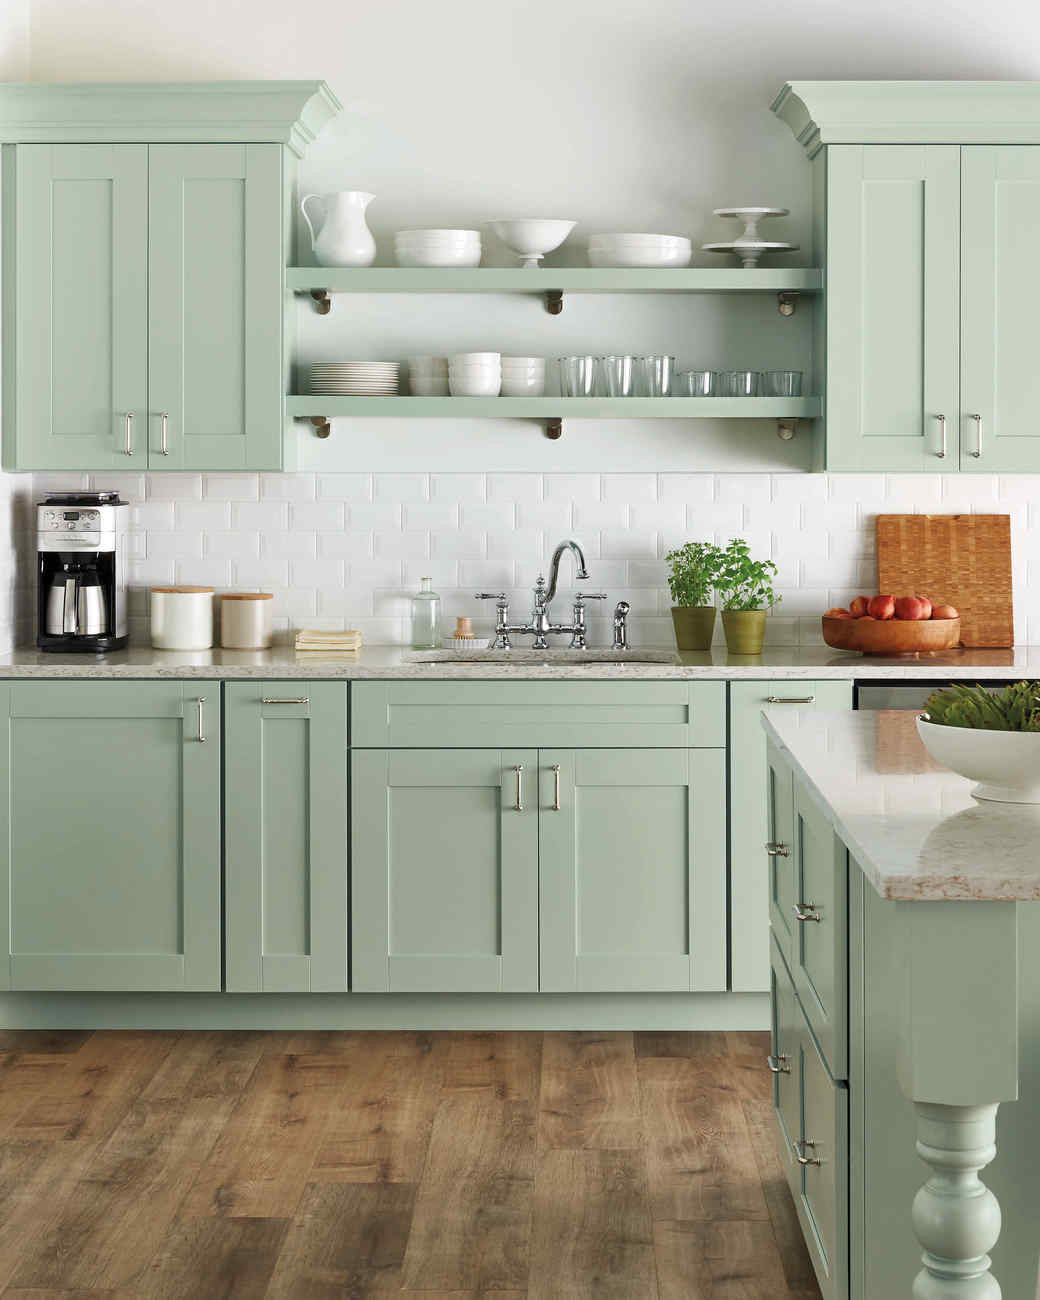 Home Depot Kitchen Cabinet
 Select Your Kitchen Style